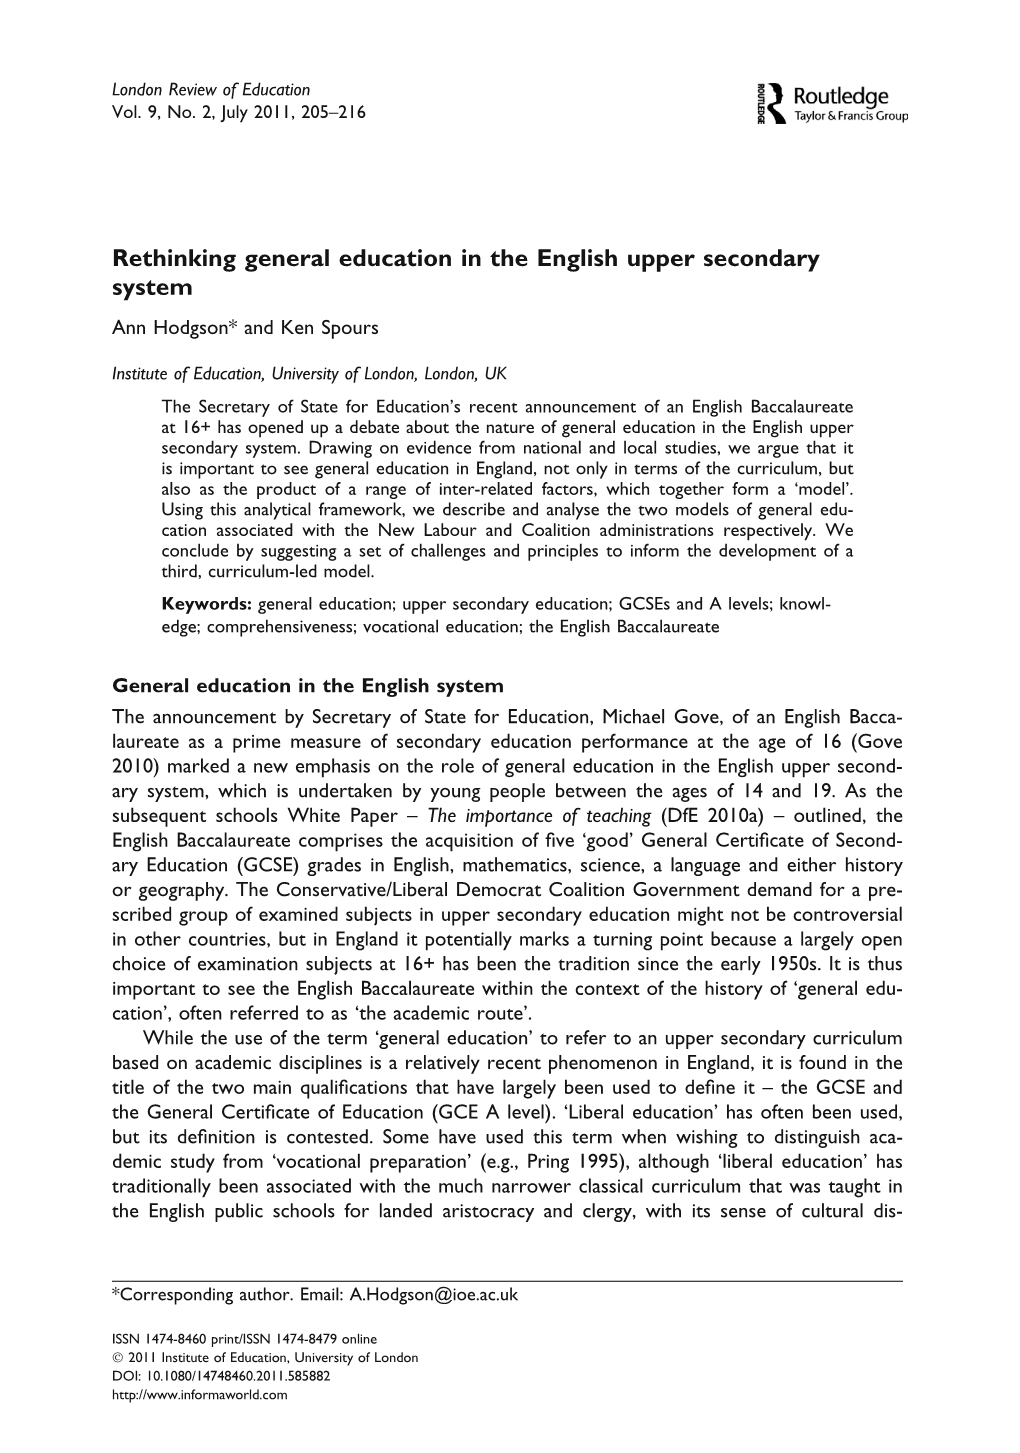 Rethinking General Education in the English Upper Secondary System Ann Hodgson* and Ken Spours